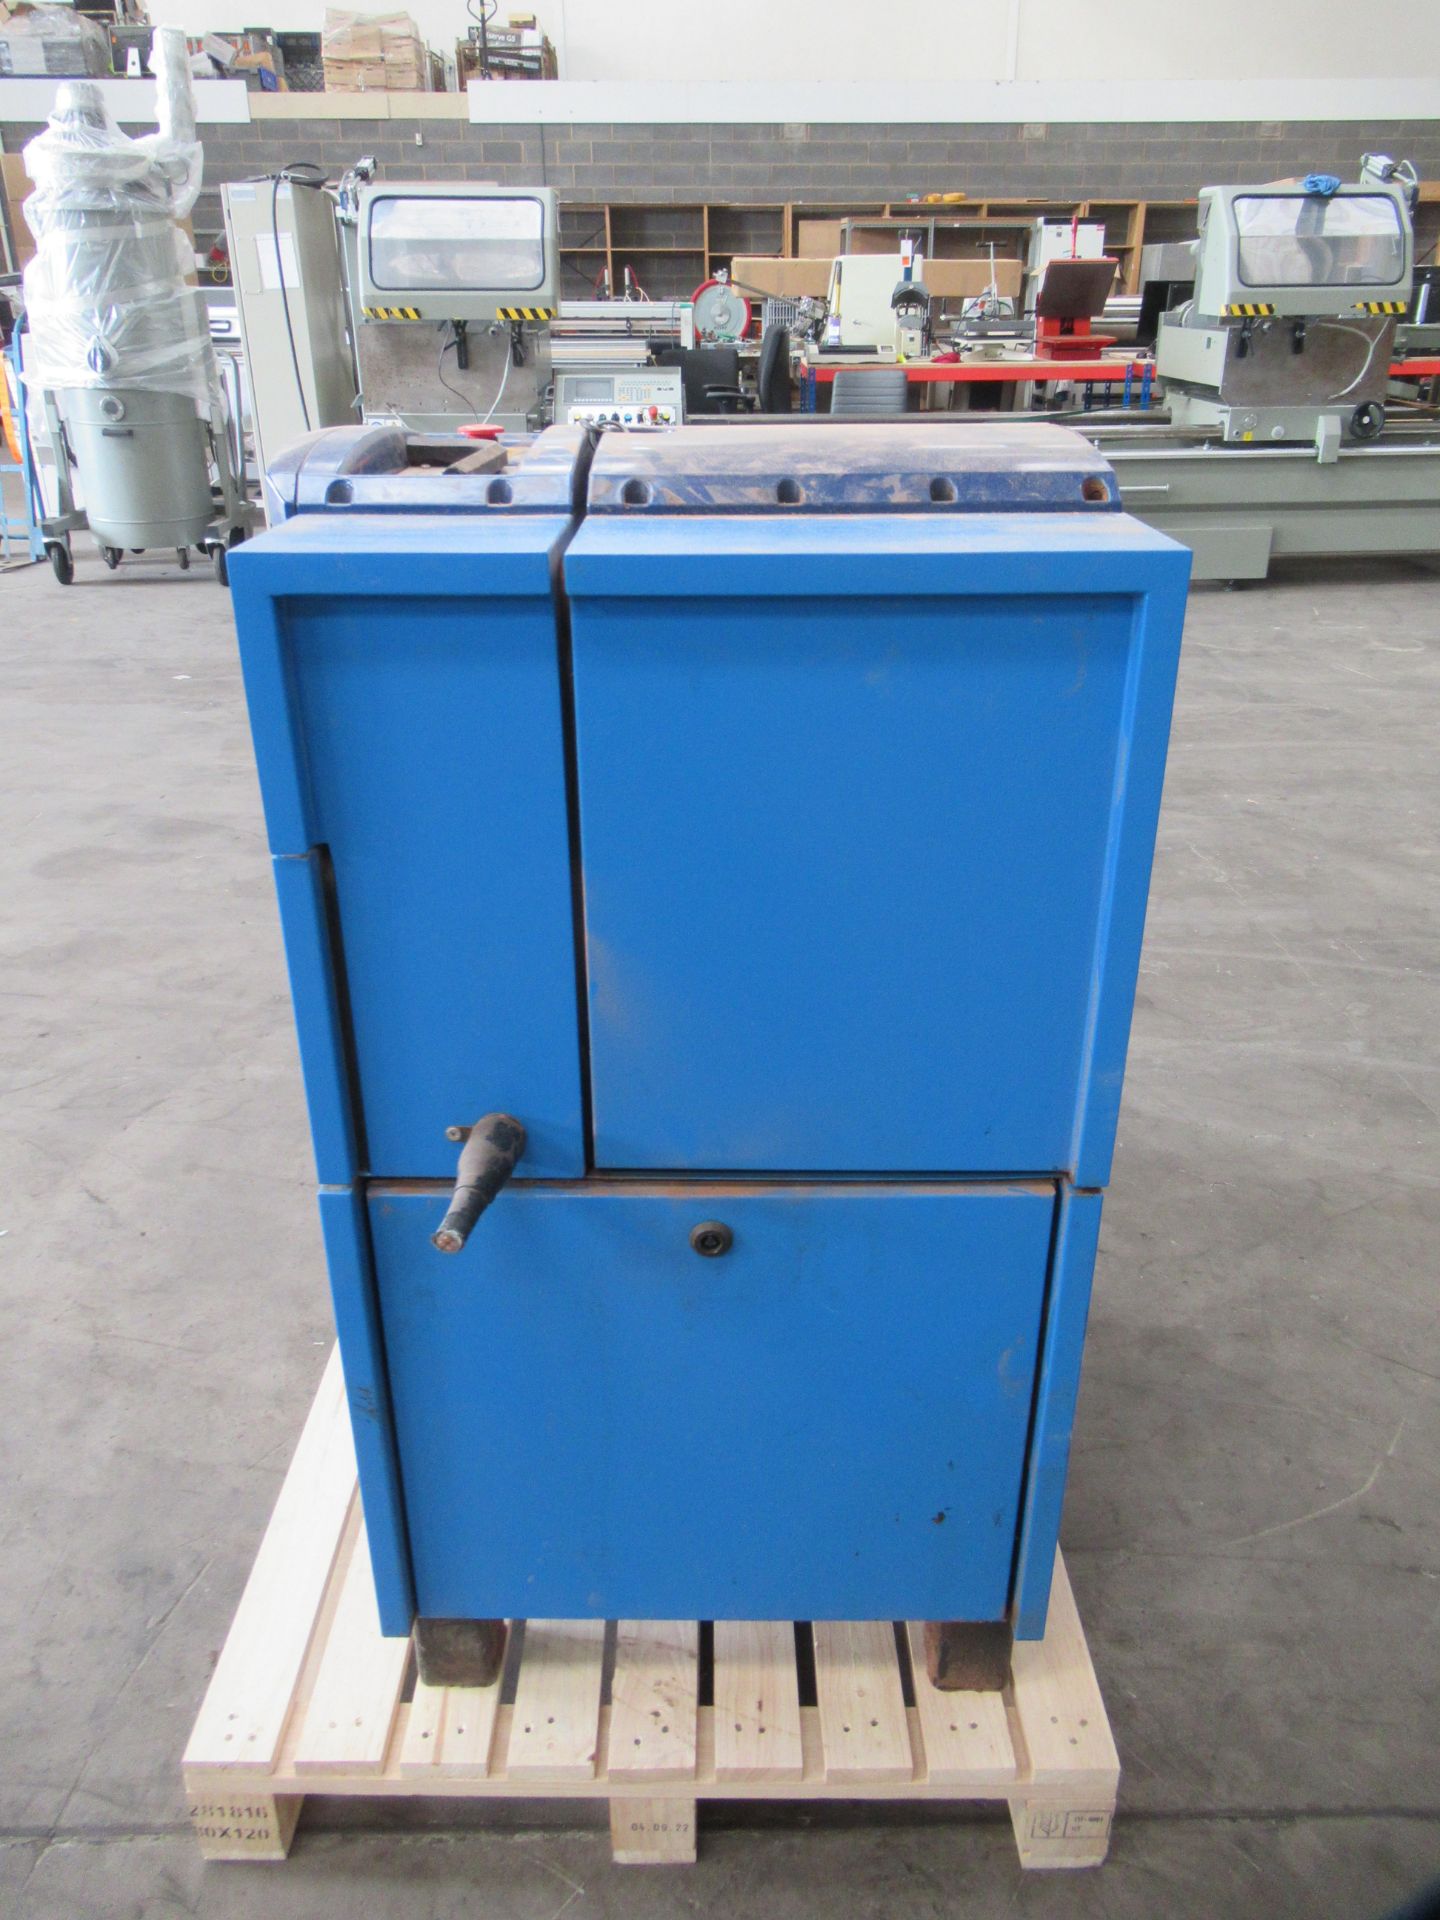 CompAir L11 Screw Compressor with Tundra Air Dryer and ABAC 200L Air Receiver Tank. - Bild 5 aus 10